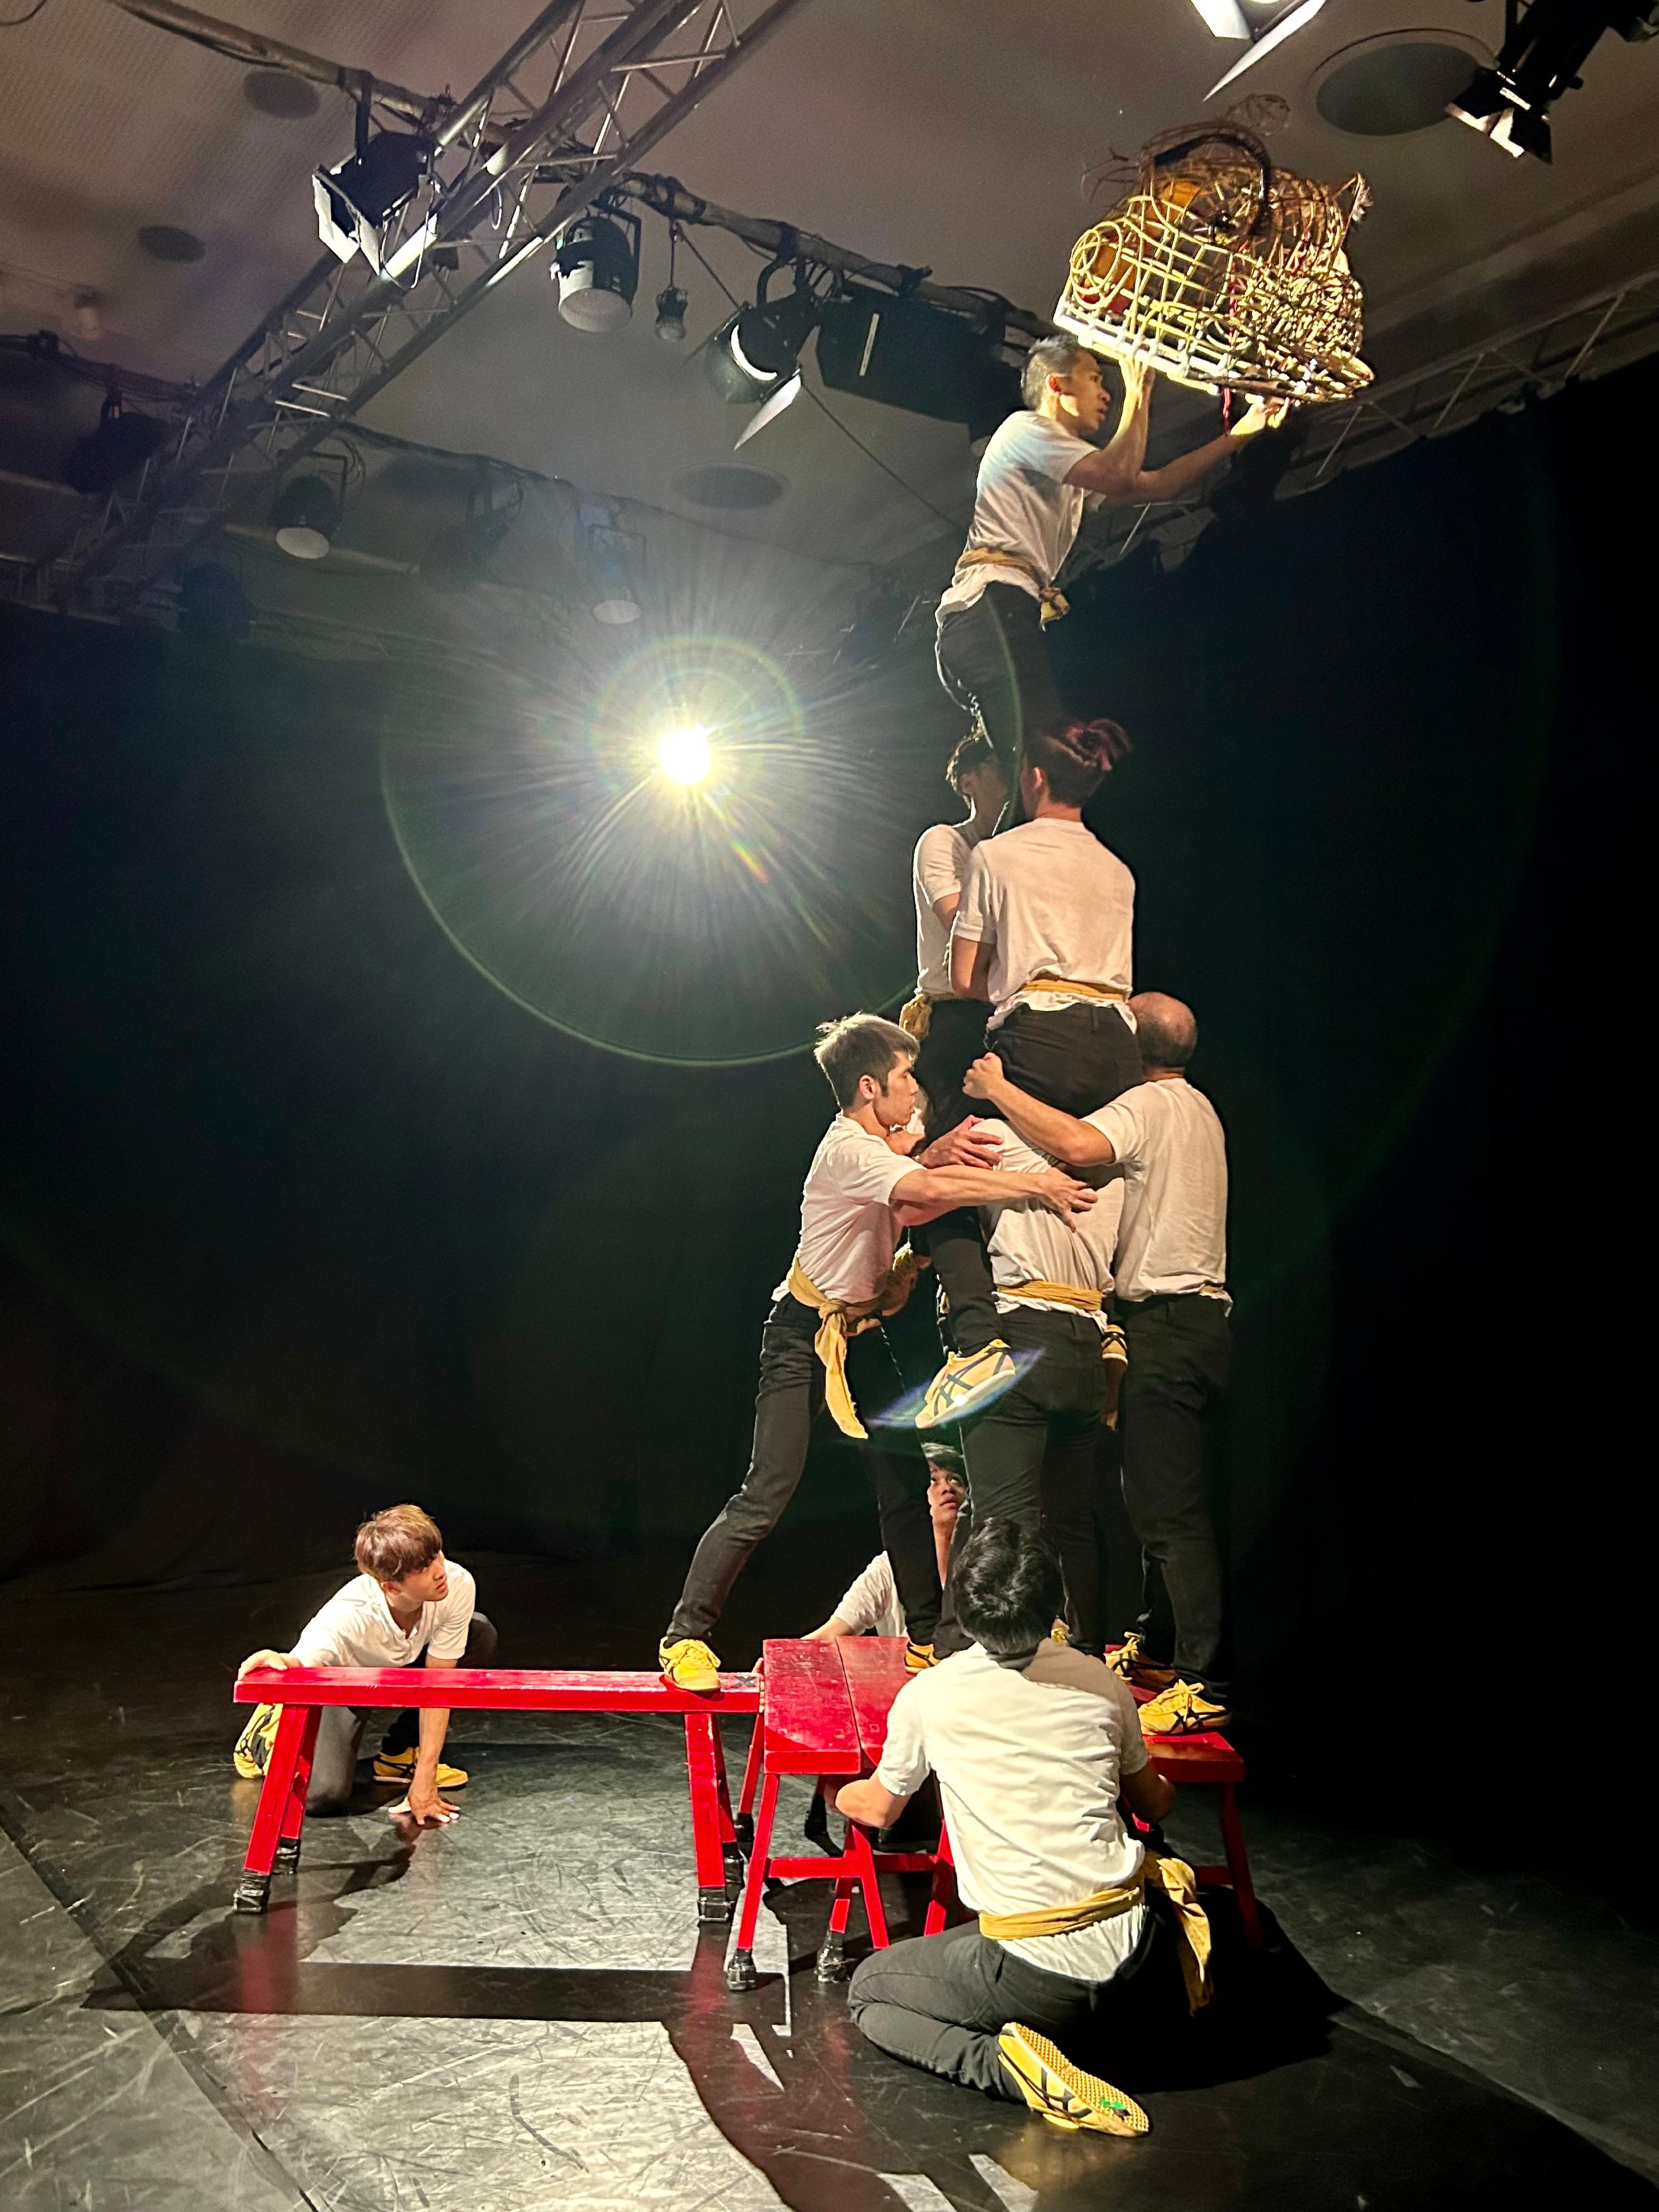 The Hong Kong Economic and Trade Office, London (London ETO) supported three Hong Kong performance programmes to stage the good stories of Hong Kong at the Edinburgh Festival Fringe in Edinburgh, United Kingdom. Photo shows TS Crew playing "No Dragon No Lion".
